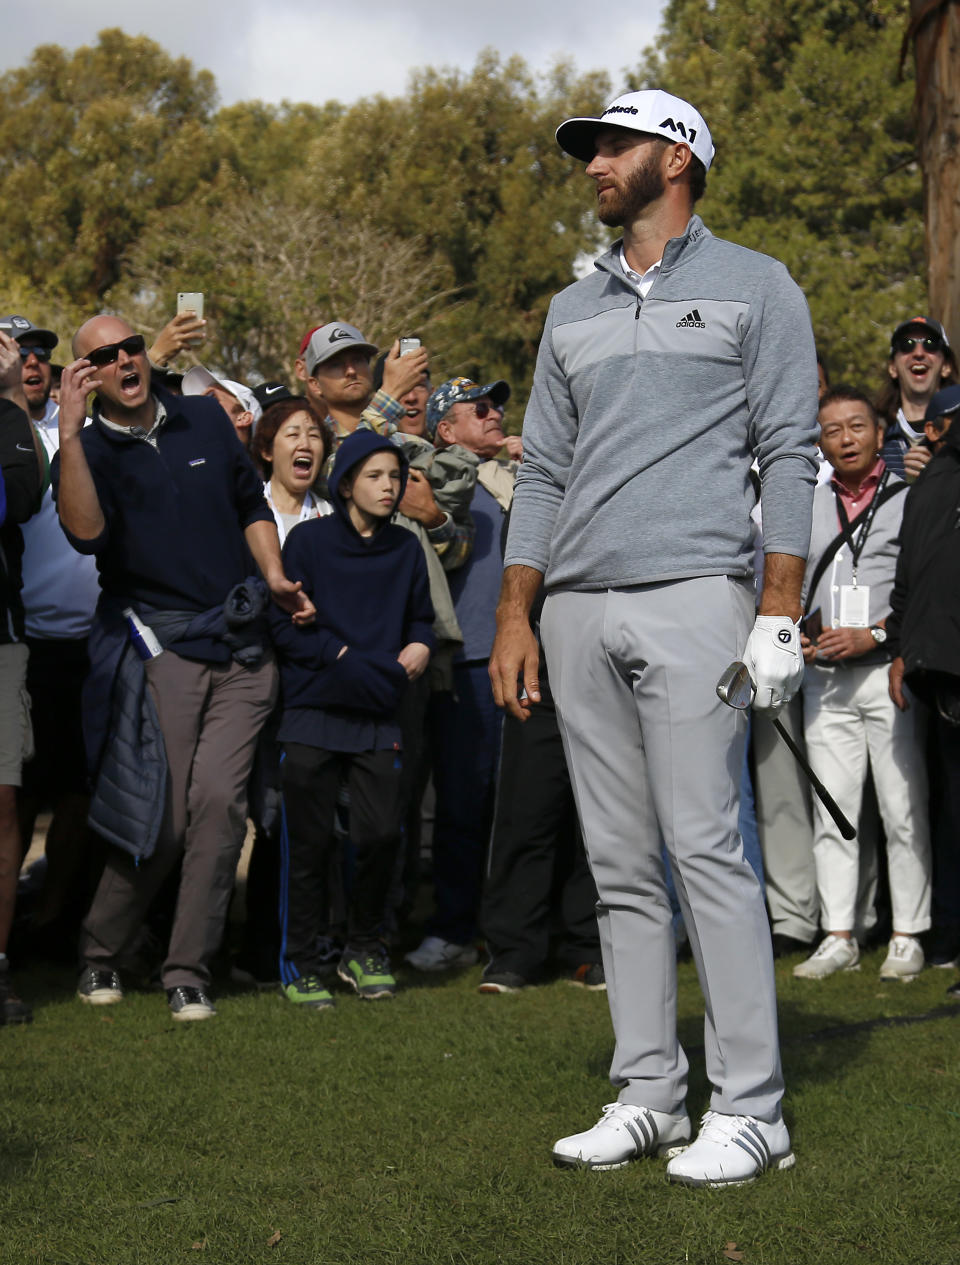 Dustin Johnson and spectators react as Johnson nearly holes out after chipping onto the eighth green during the final round of the Genesis Open golf tournament at Riviera Country Club Sunday, Feb. 19, 2017, in the Pacific Palisades area of Los Angeles. (AP Photo/Ryan Kang)